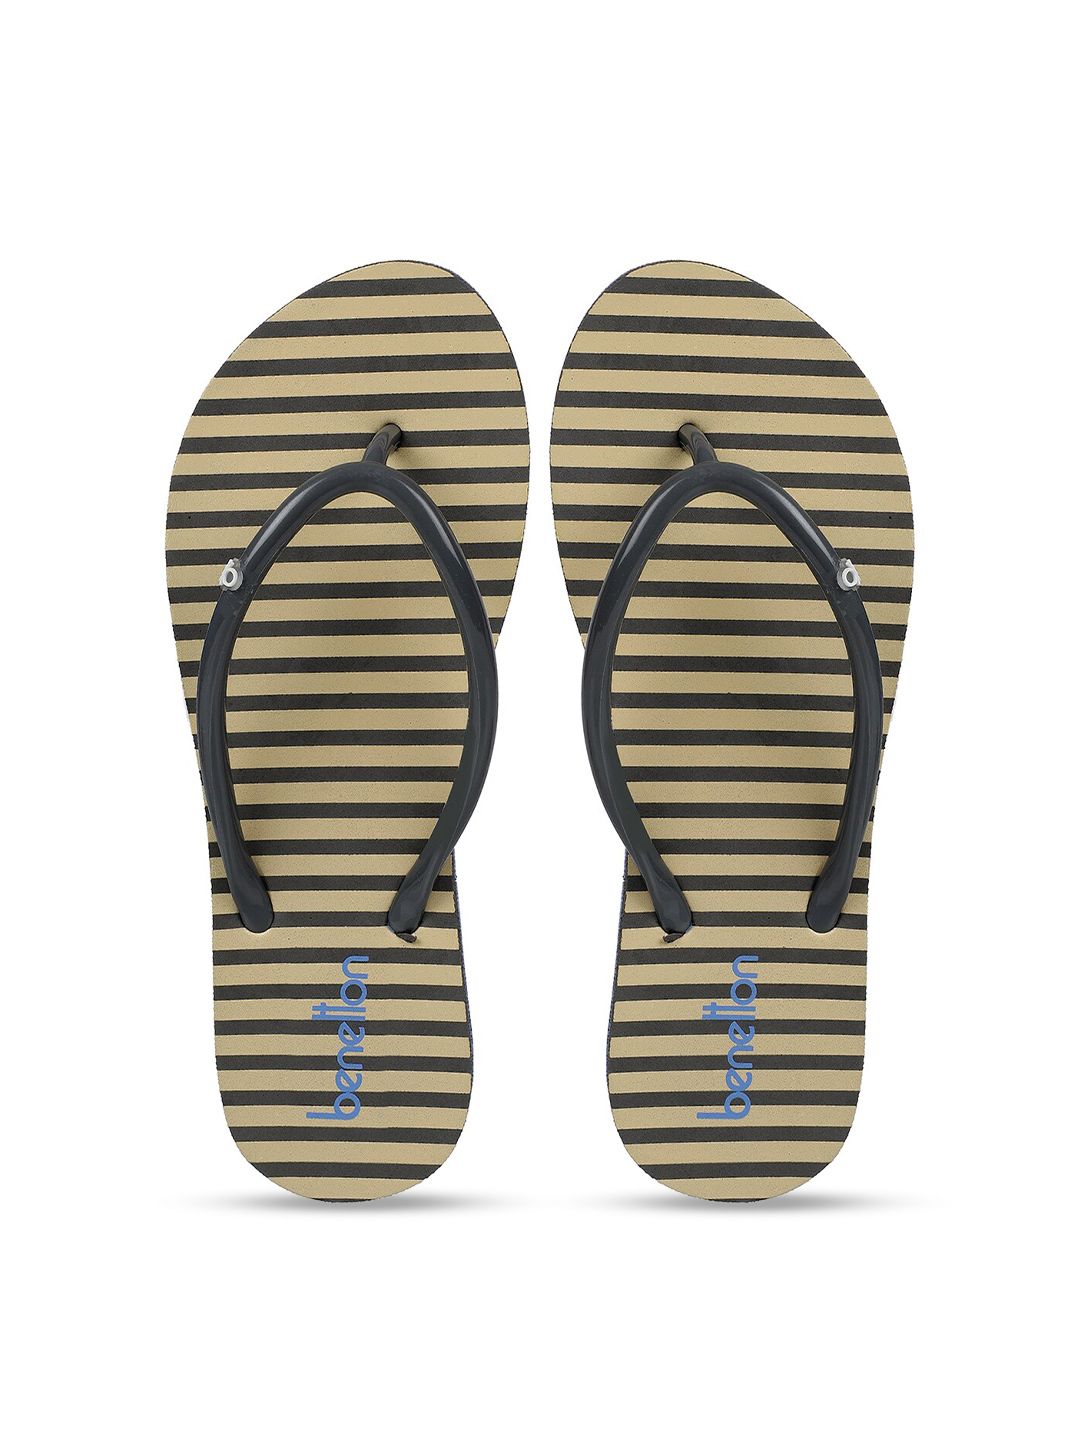 United Colors of Benetton Women Beige & Black Striped Printed Rubber Thong Flip-Flops Price in India